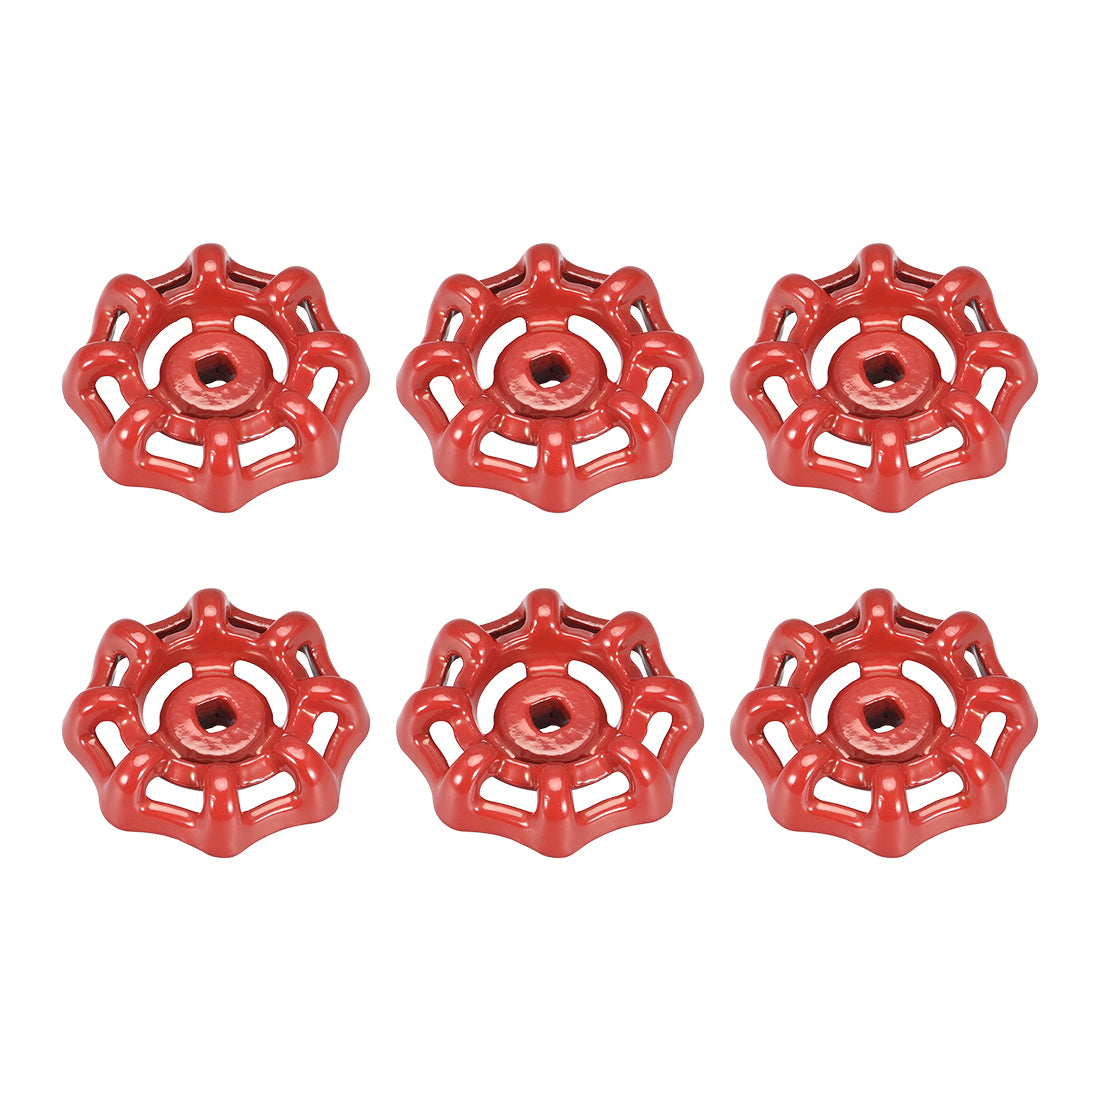 Uxcell Uxcell Round Wheel Handle, Square Broach 6x6mm, Wheel OD 51mm Paint Cast Steel Red 6Pcs